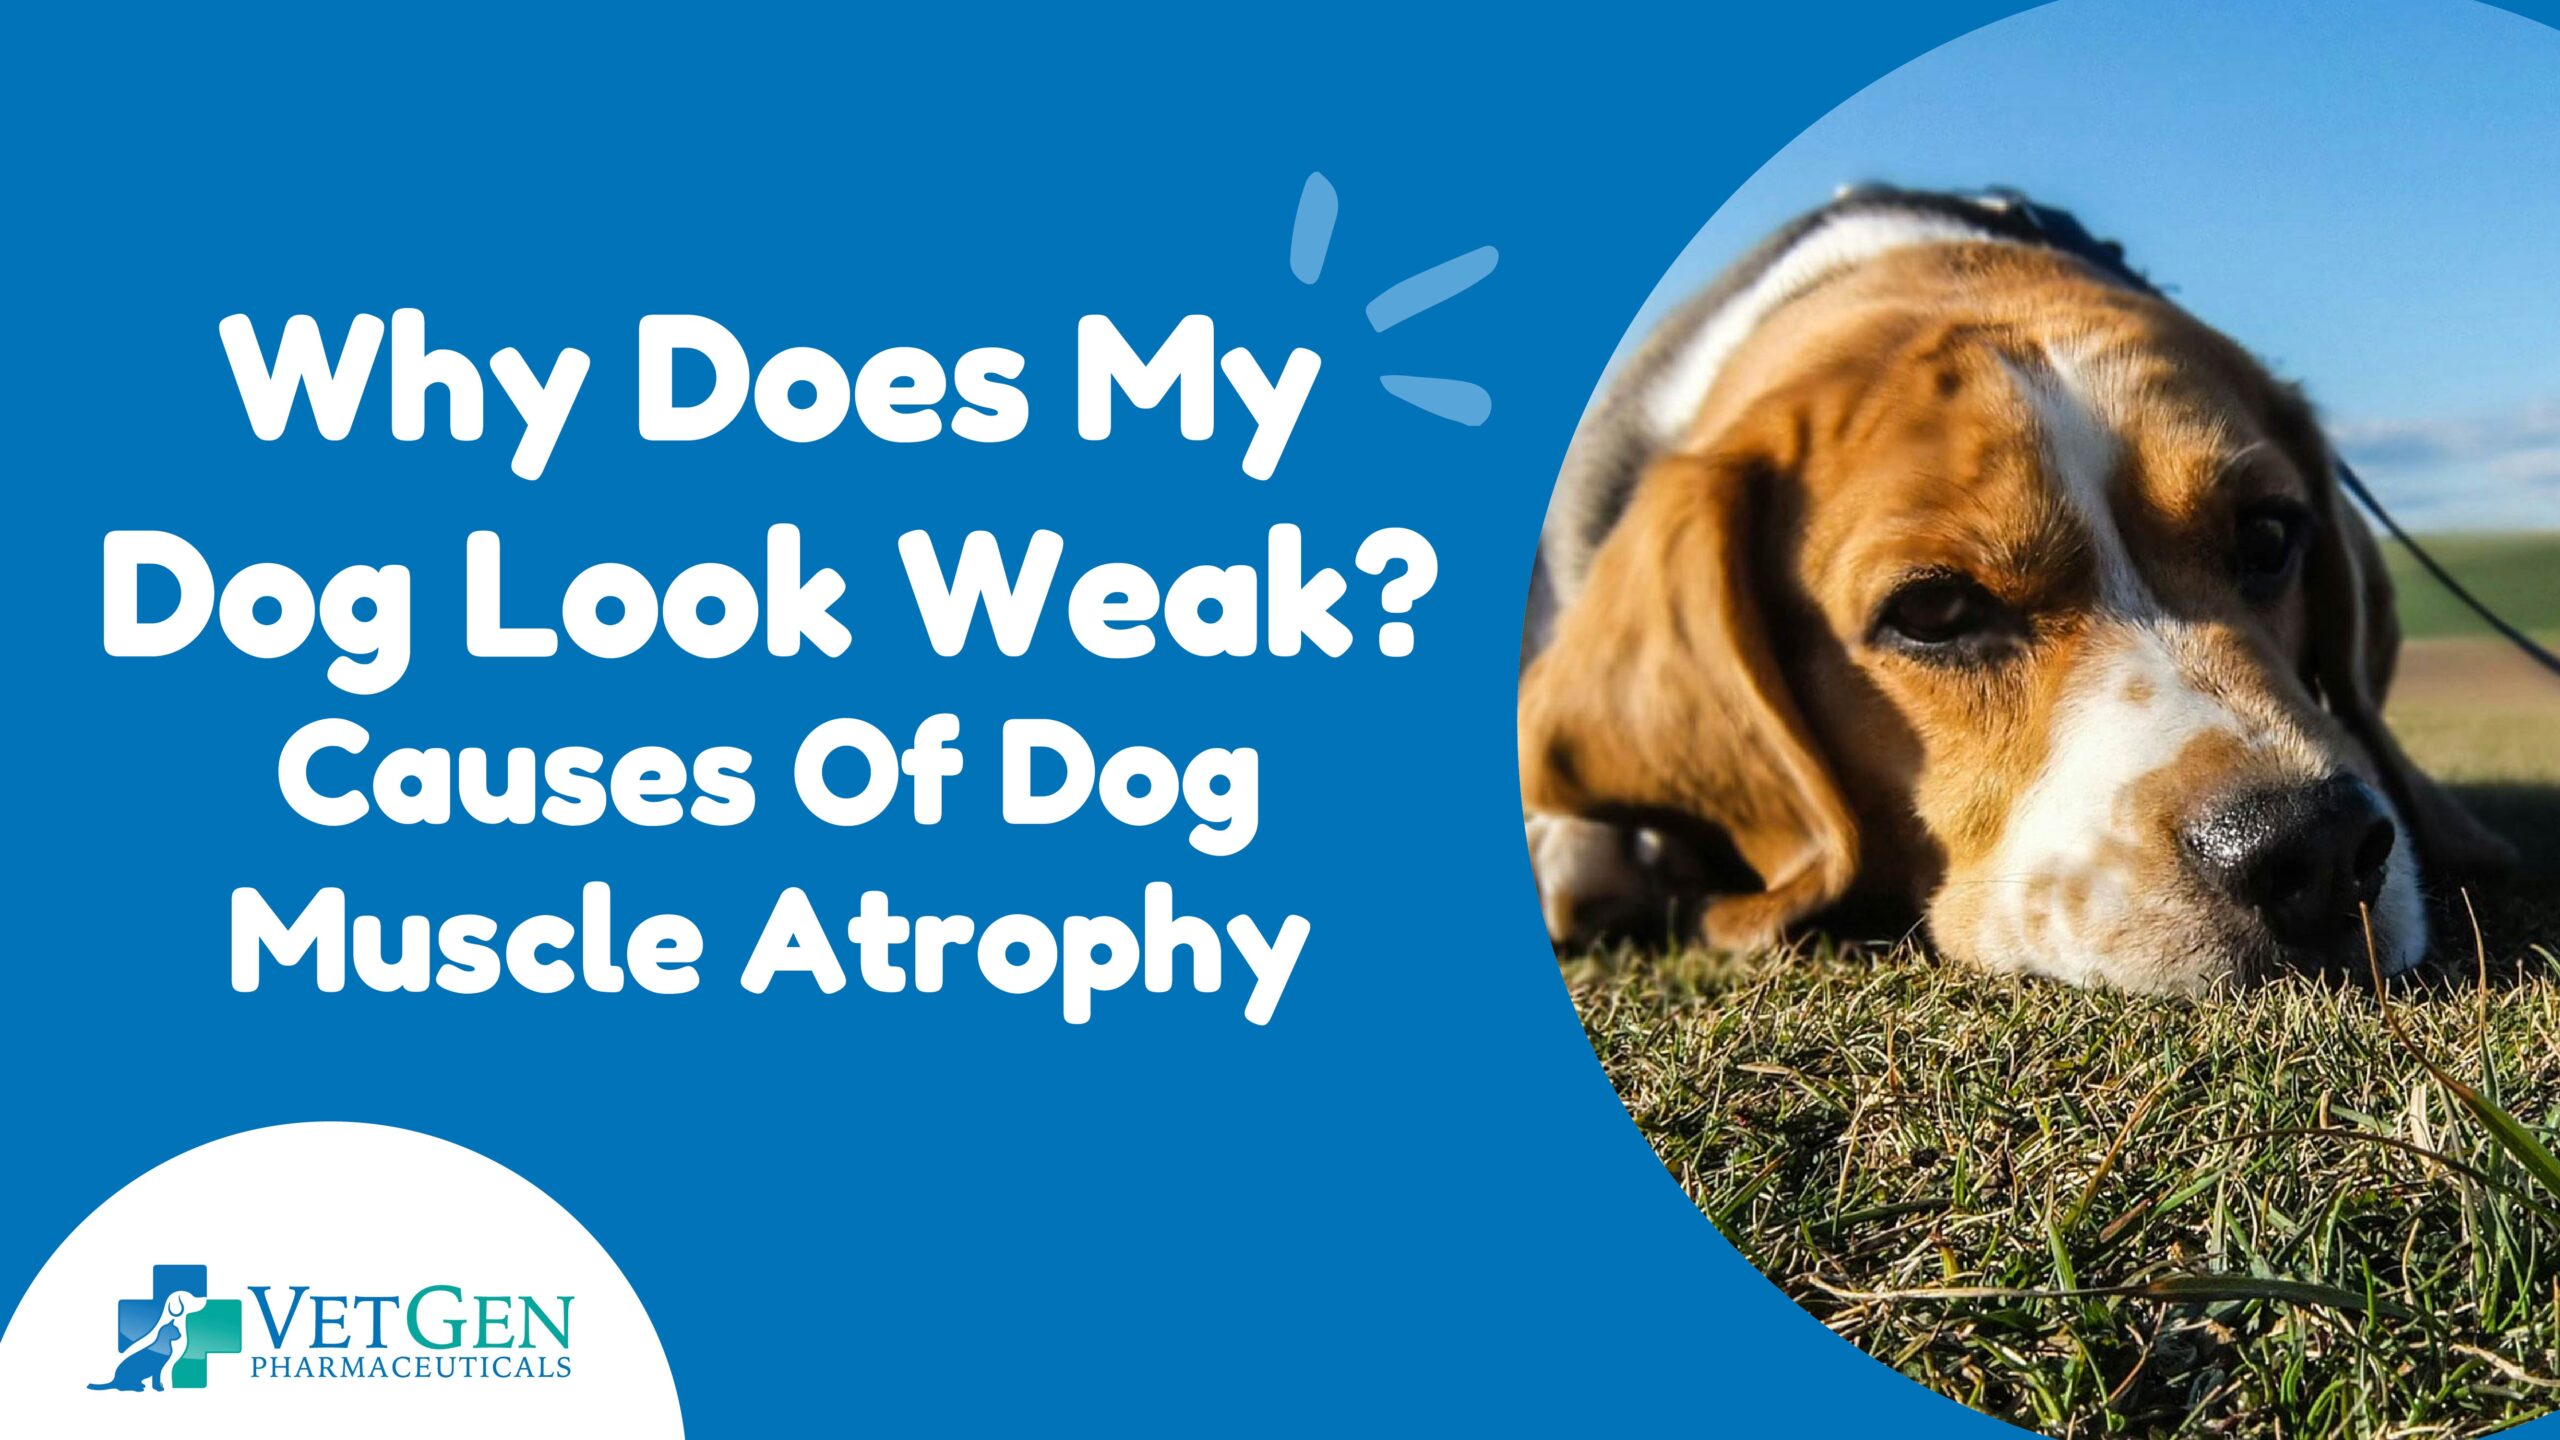 Why Does My Dog Look Weak? Causes Of Dog Muscle Atrophy